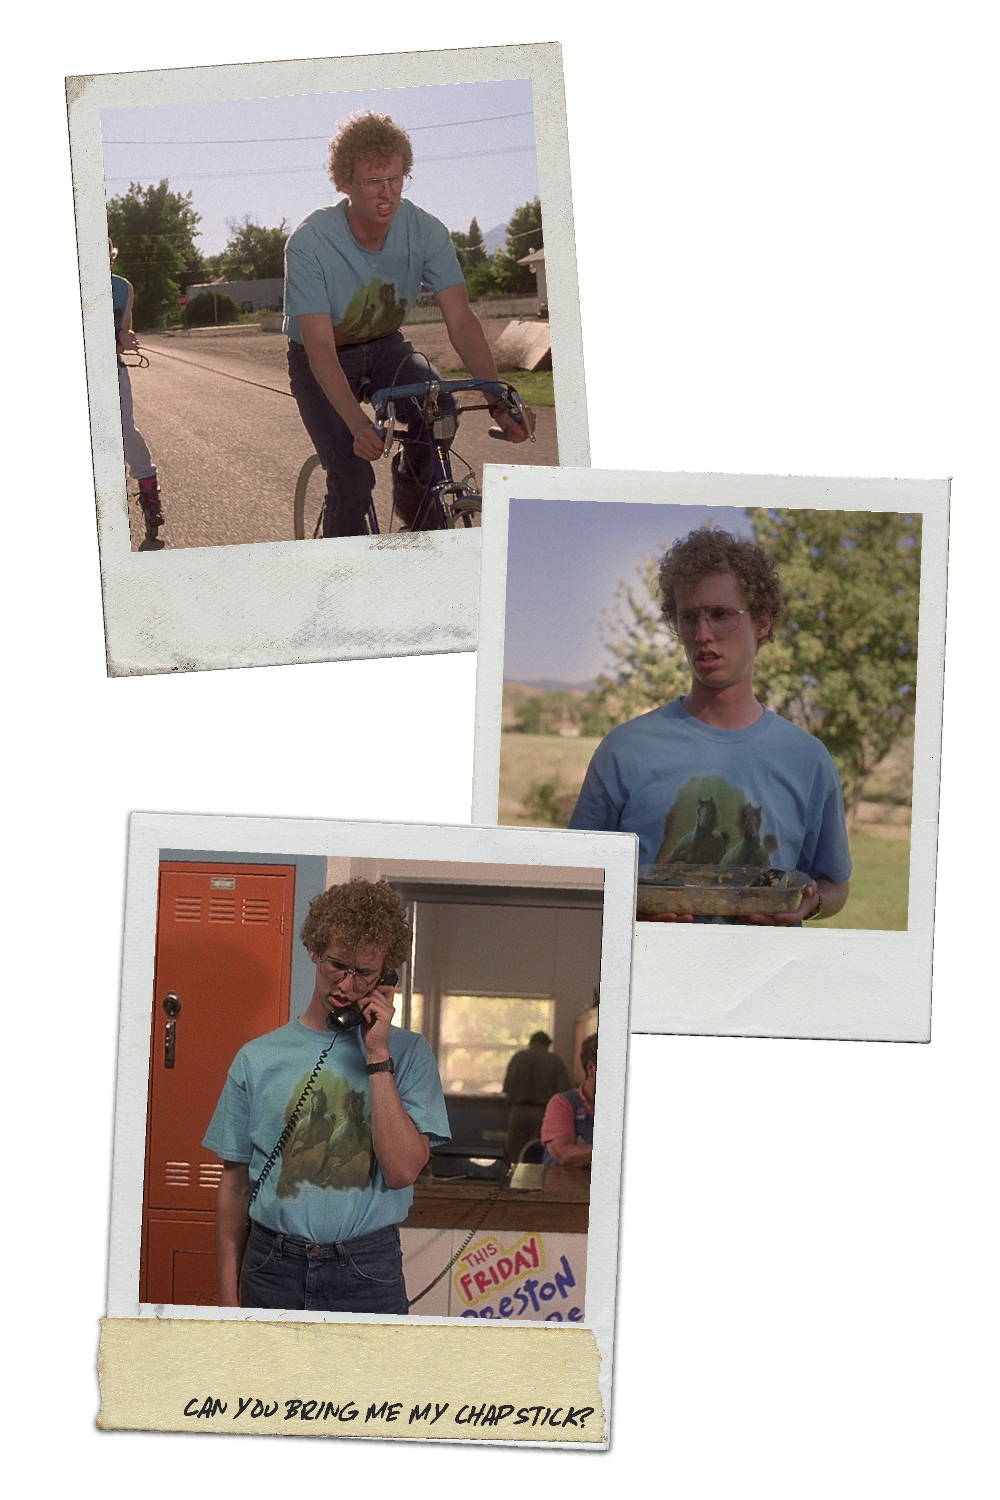 Napoleon Dynamite t shirts from the movie